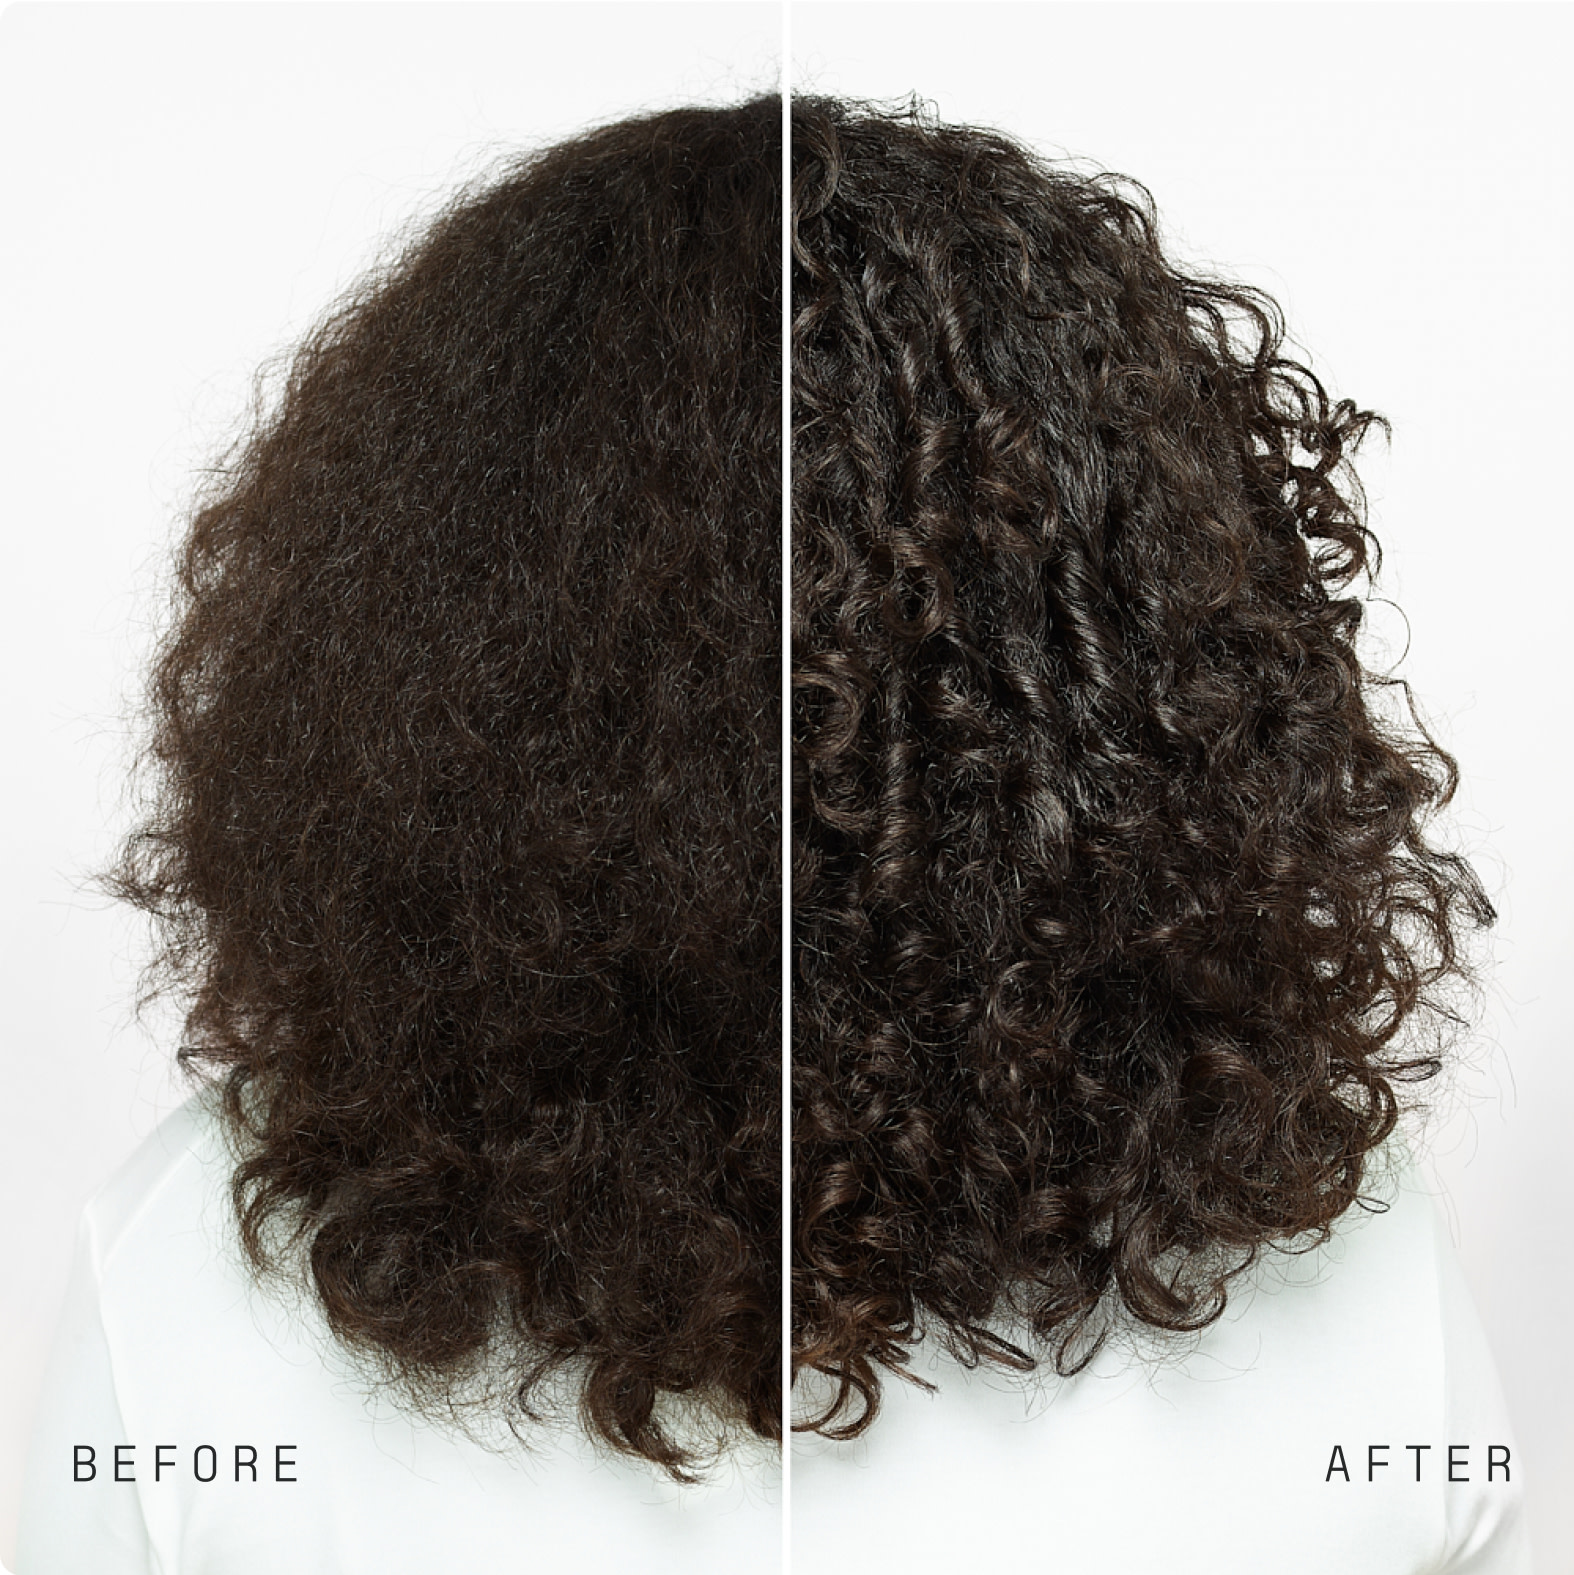 Comparison of curly hair before and after using Function of Beauty shampoo